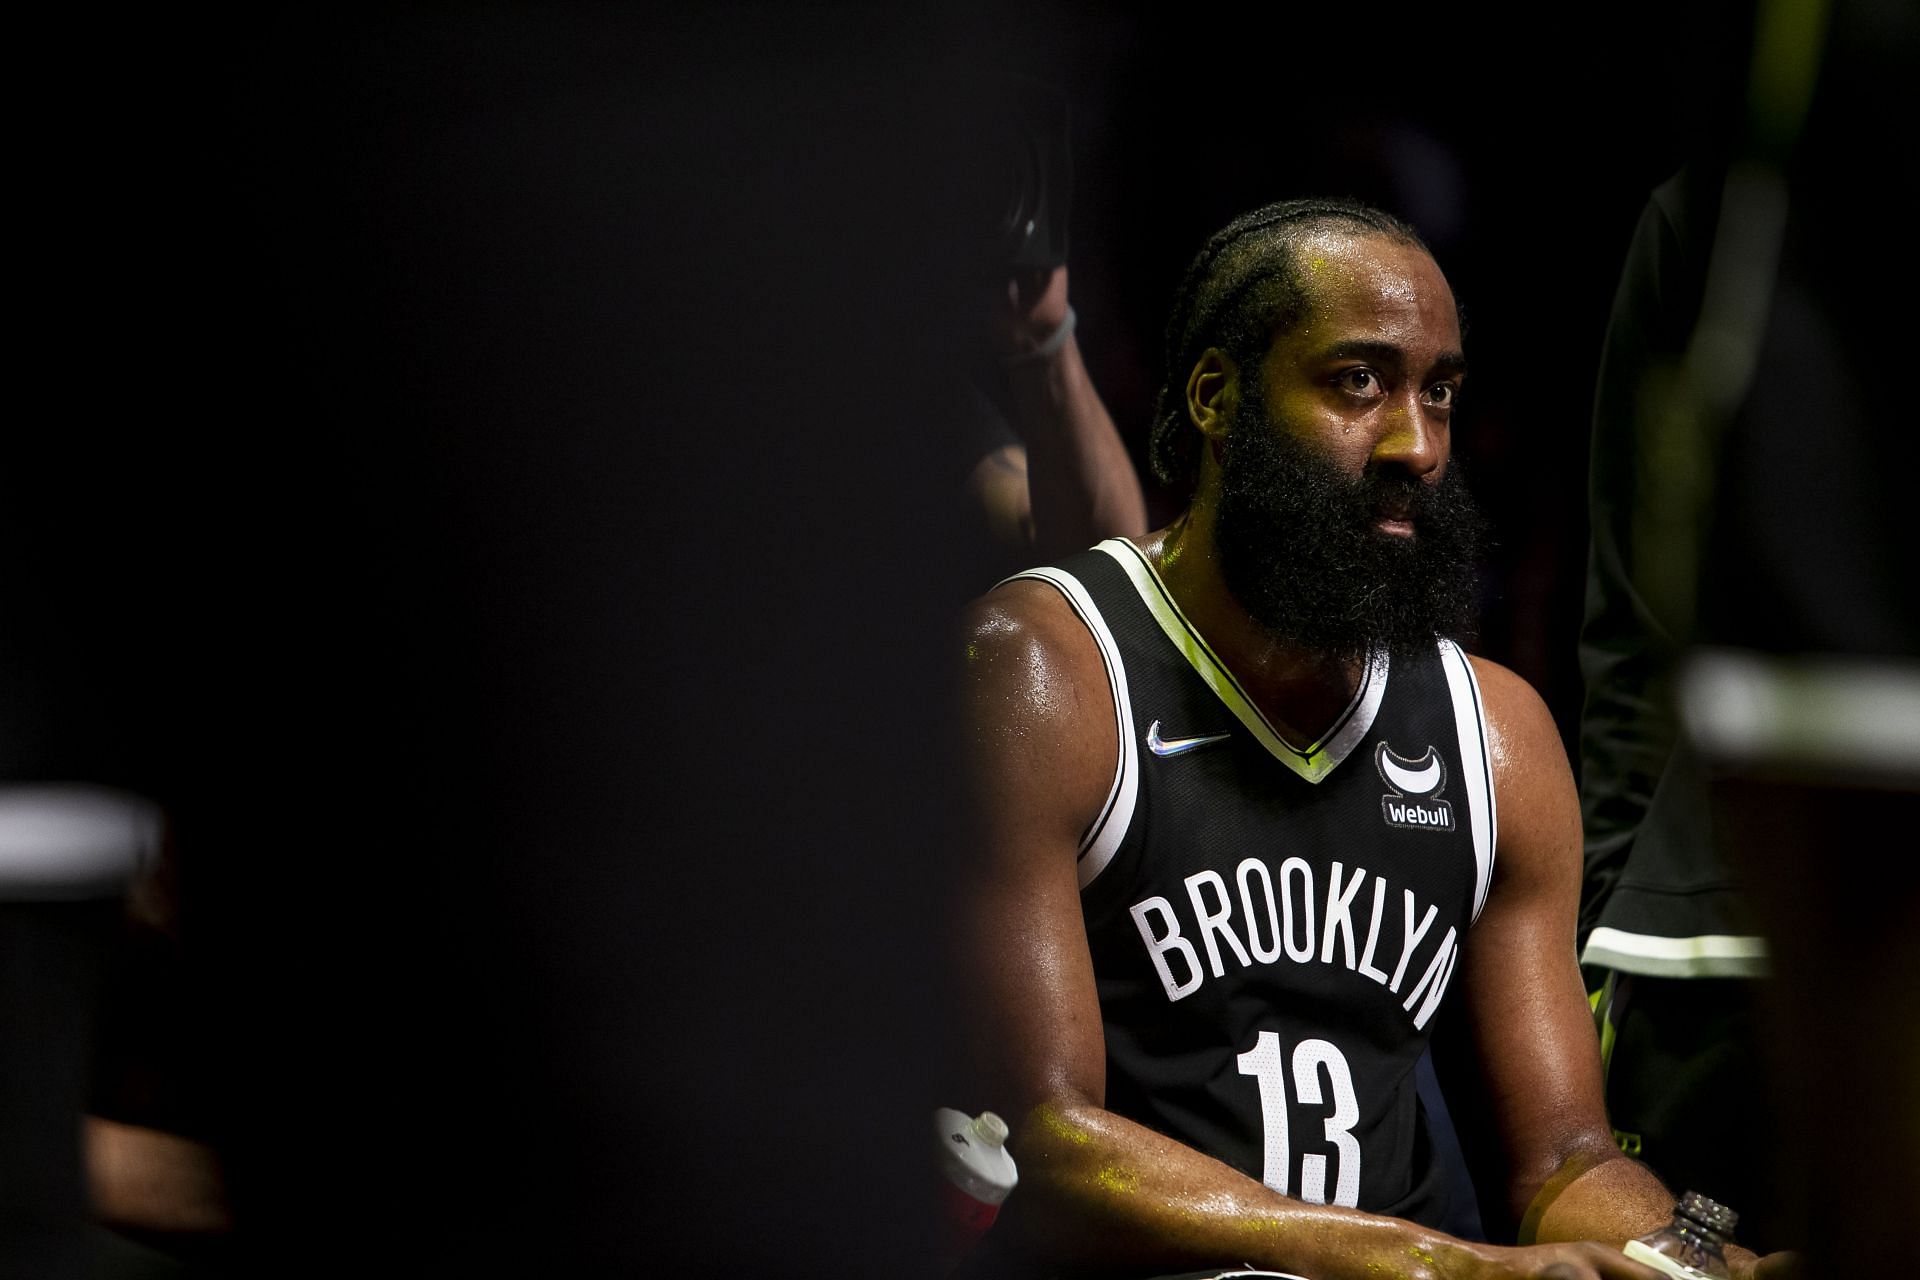 The Philadelphia 76ers are going all in with the move for James Harden.